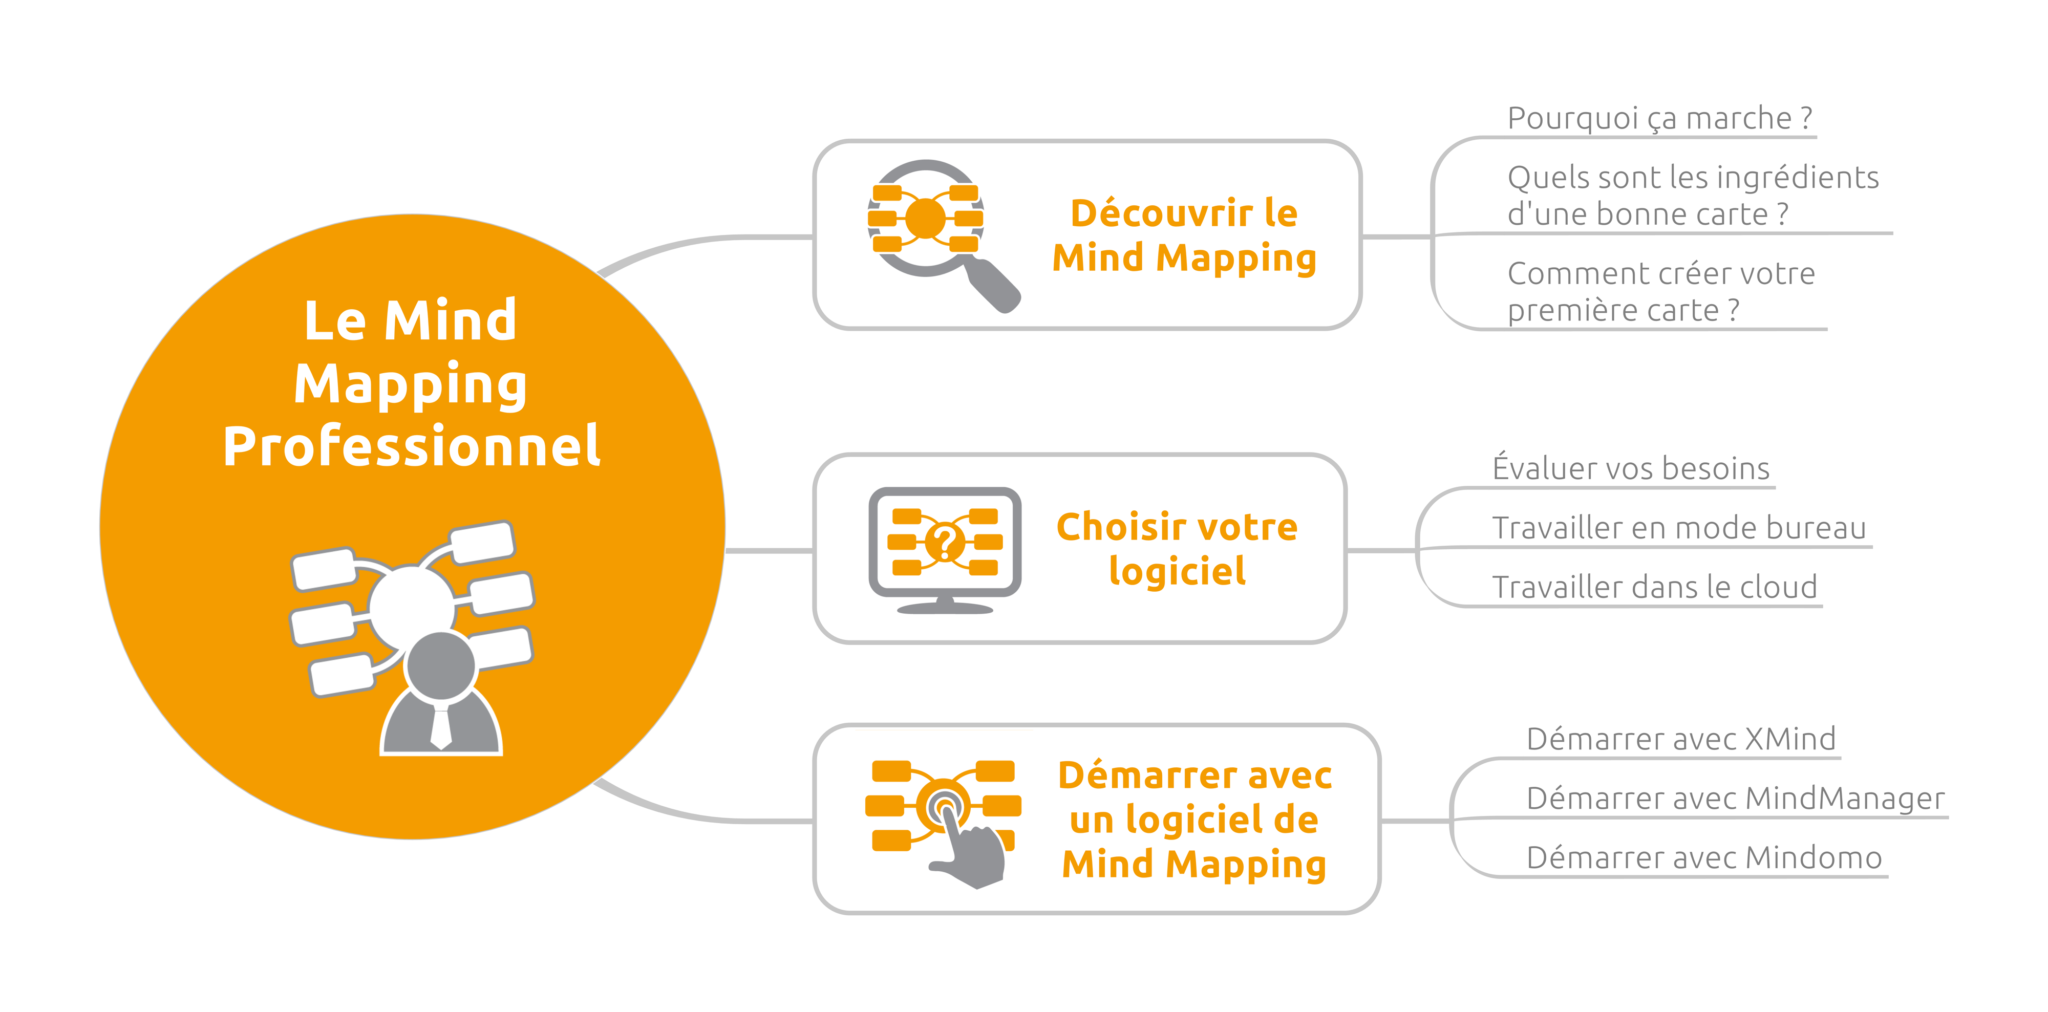 CH1-Le-Mind-Mapping-professionnel